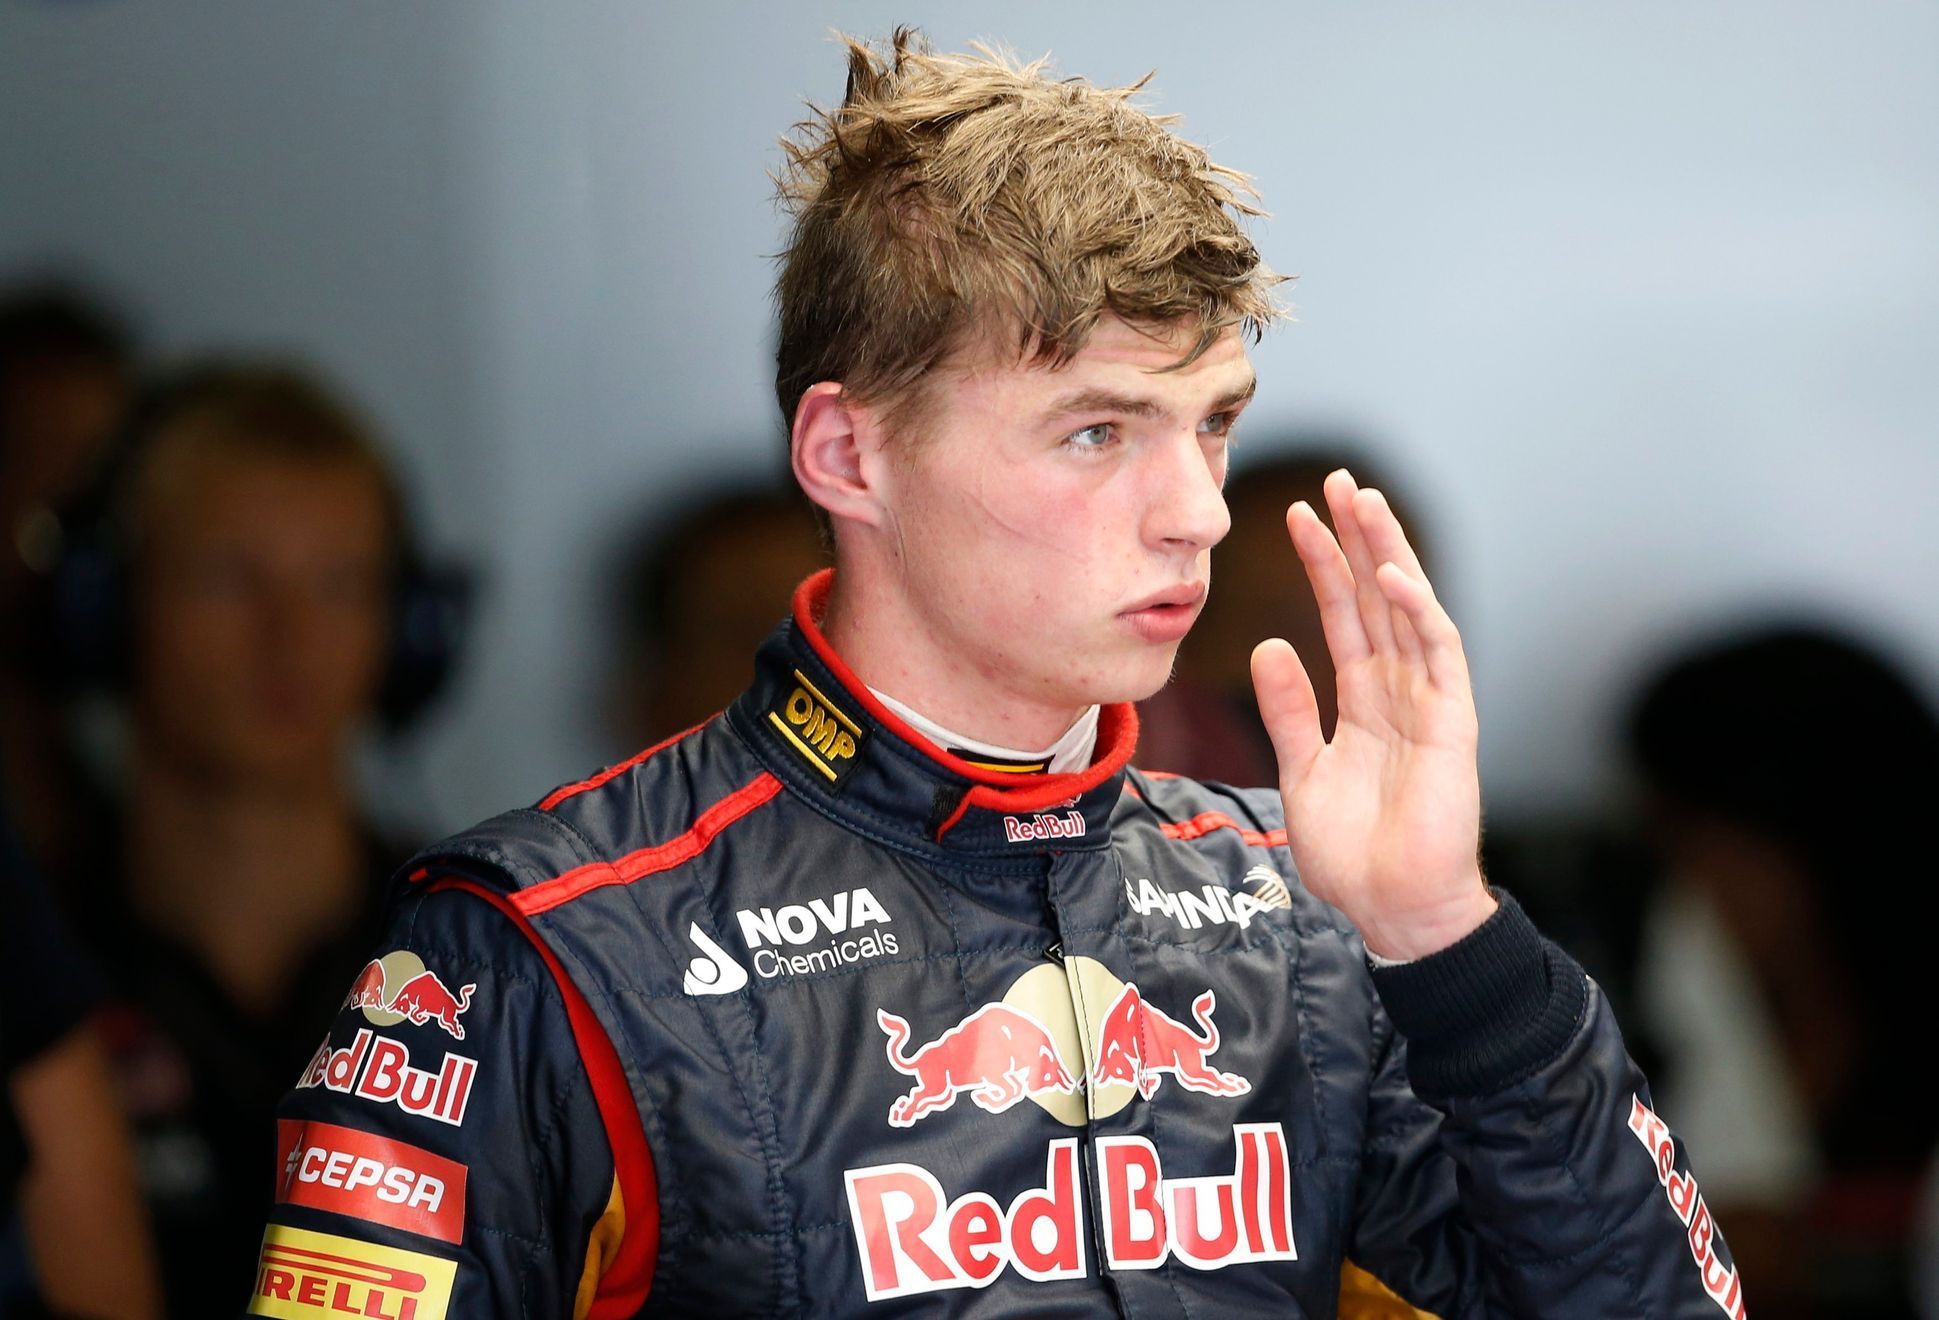 Toro Rosso Formula One driver Verstappen of the Netherlands returns to the garage after his car stalled on the track during the first practice session of the Japanese F1 Grand Prix at the Suzuka Circu